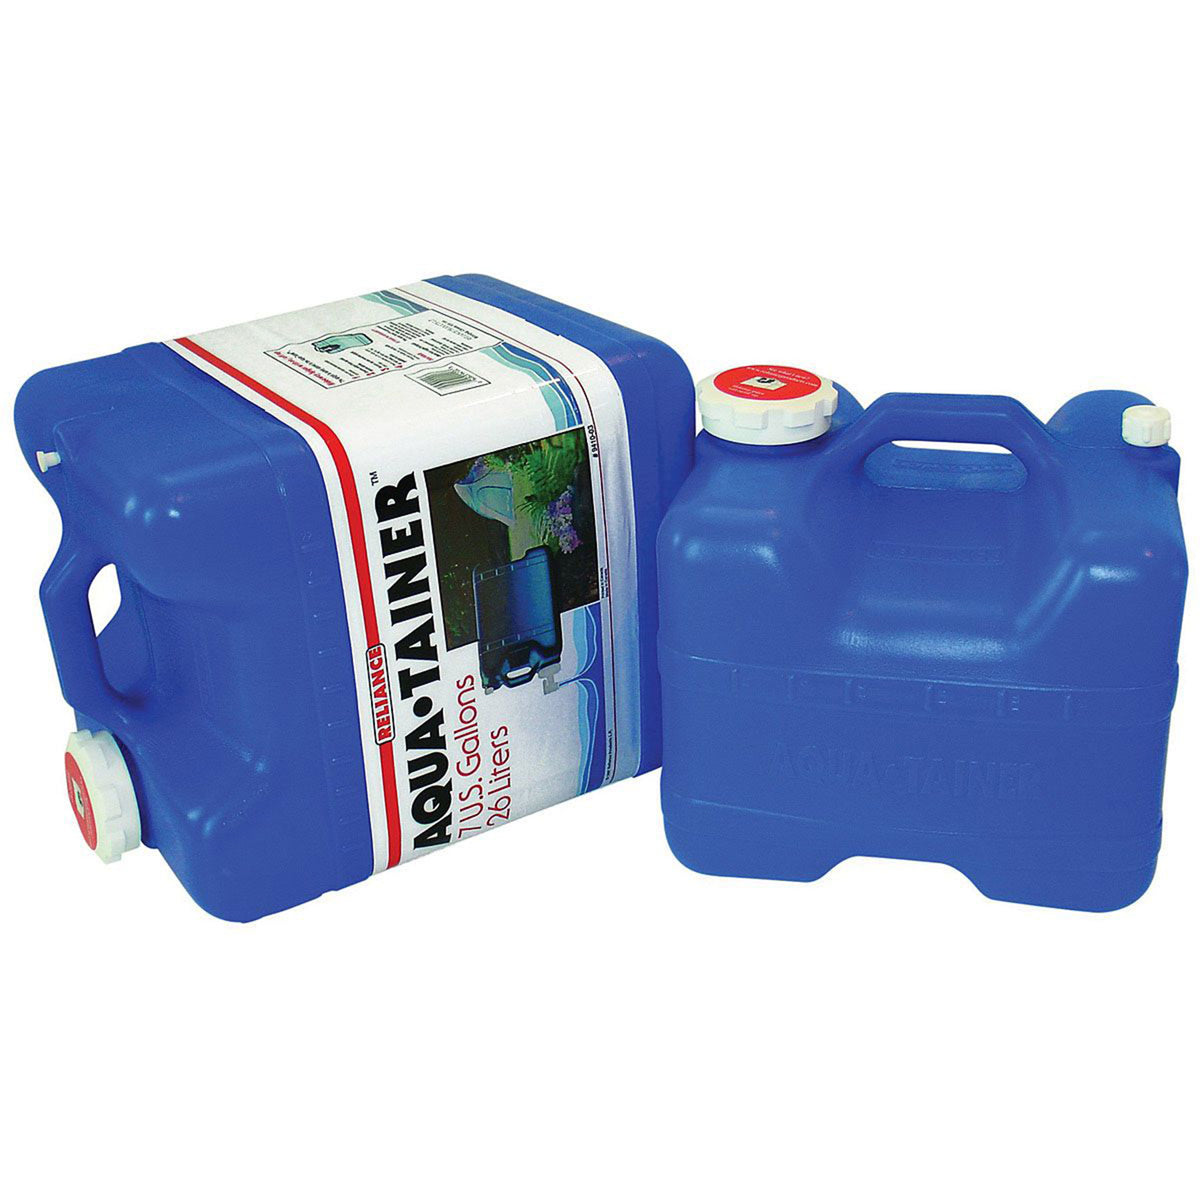 aqua-tainer 7 gallon water carrier